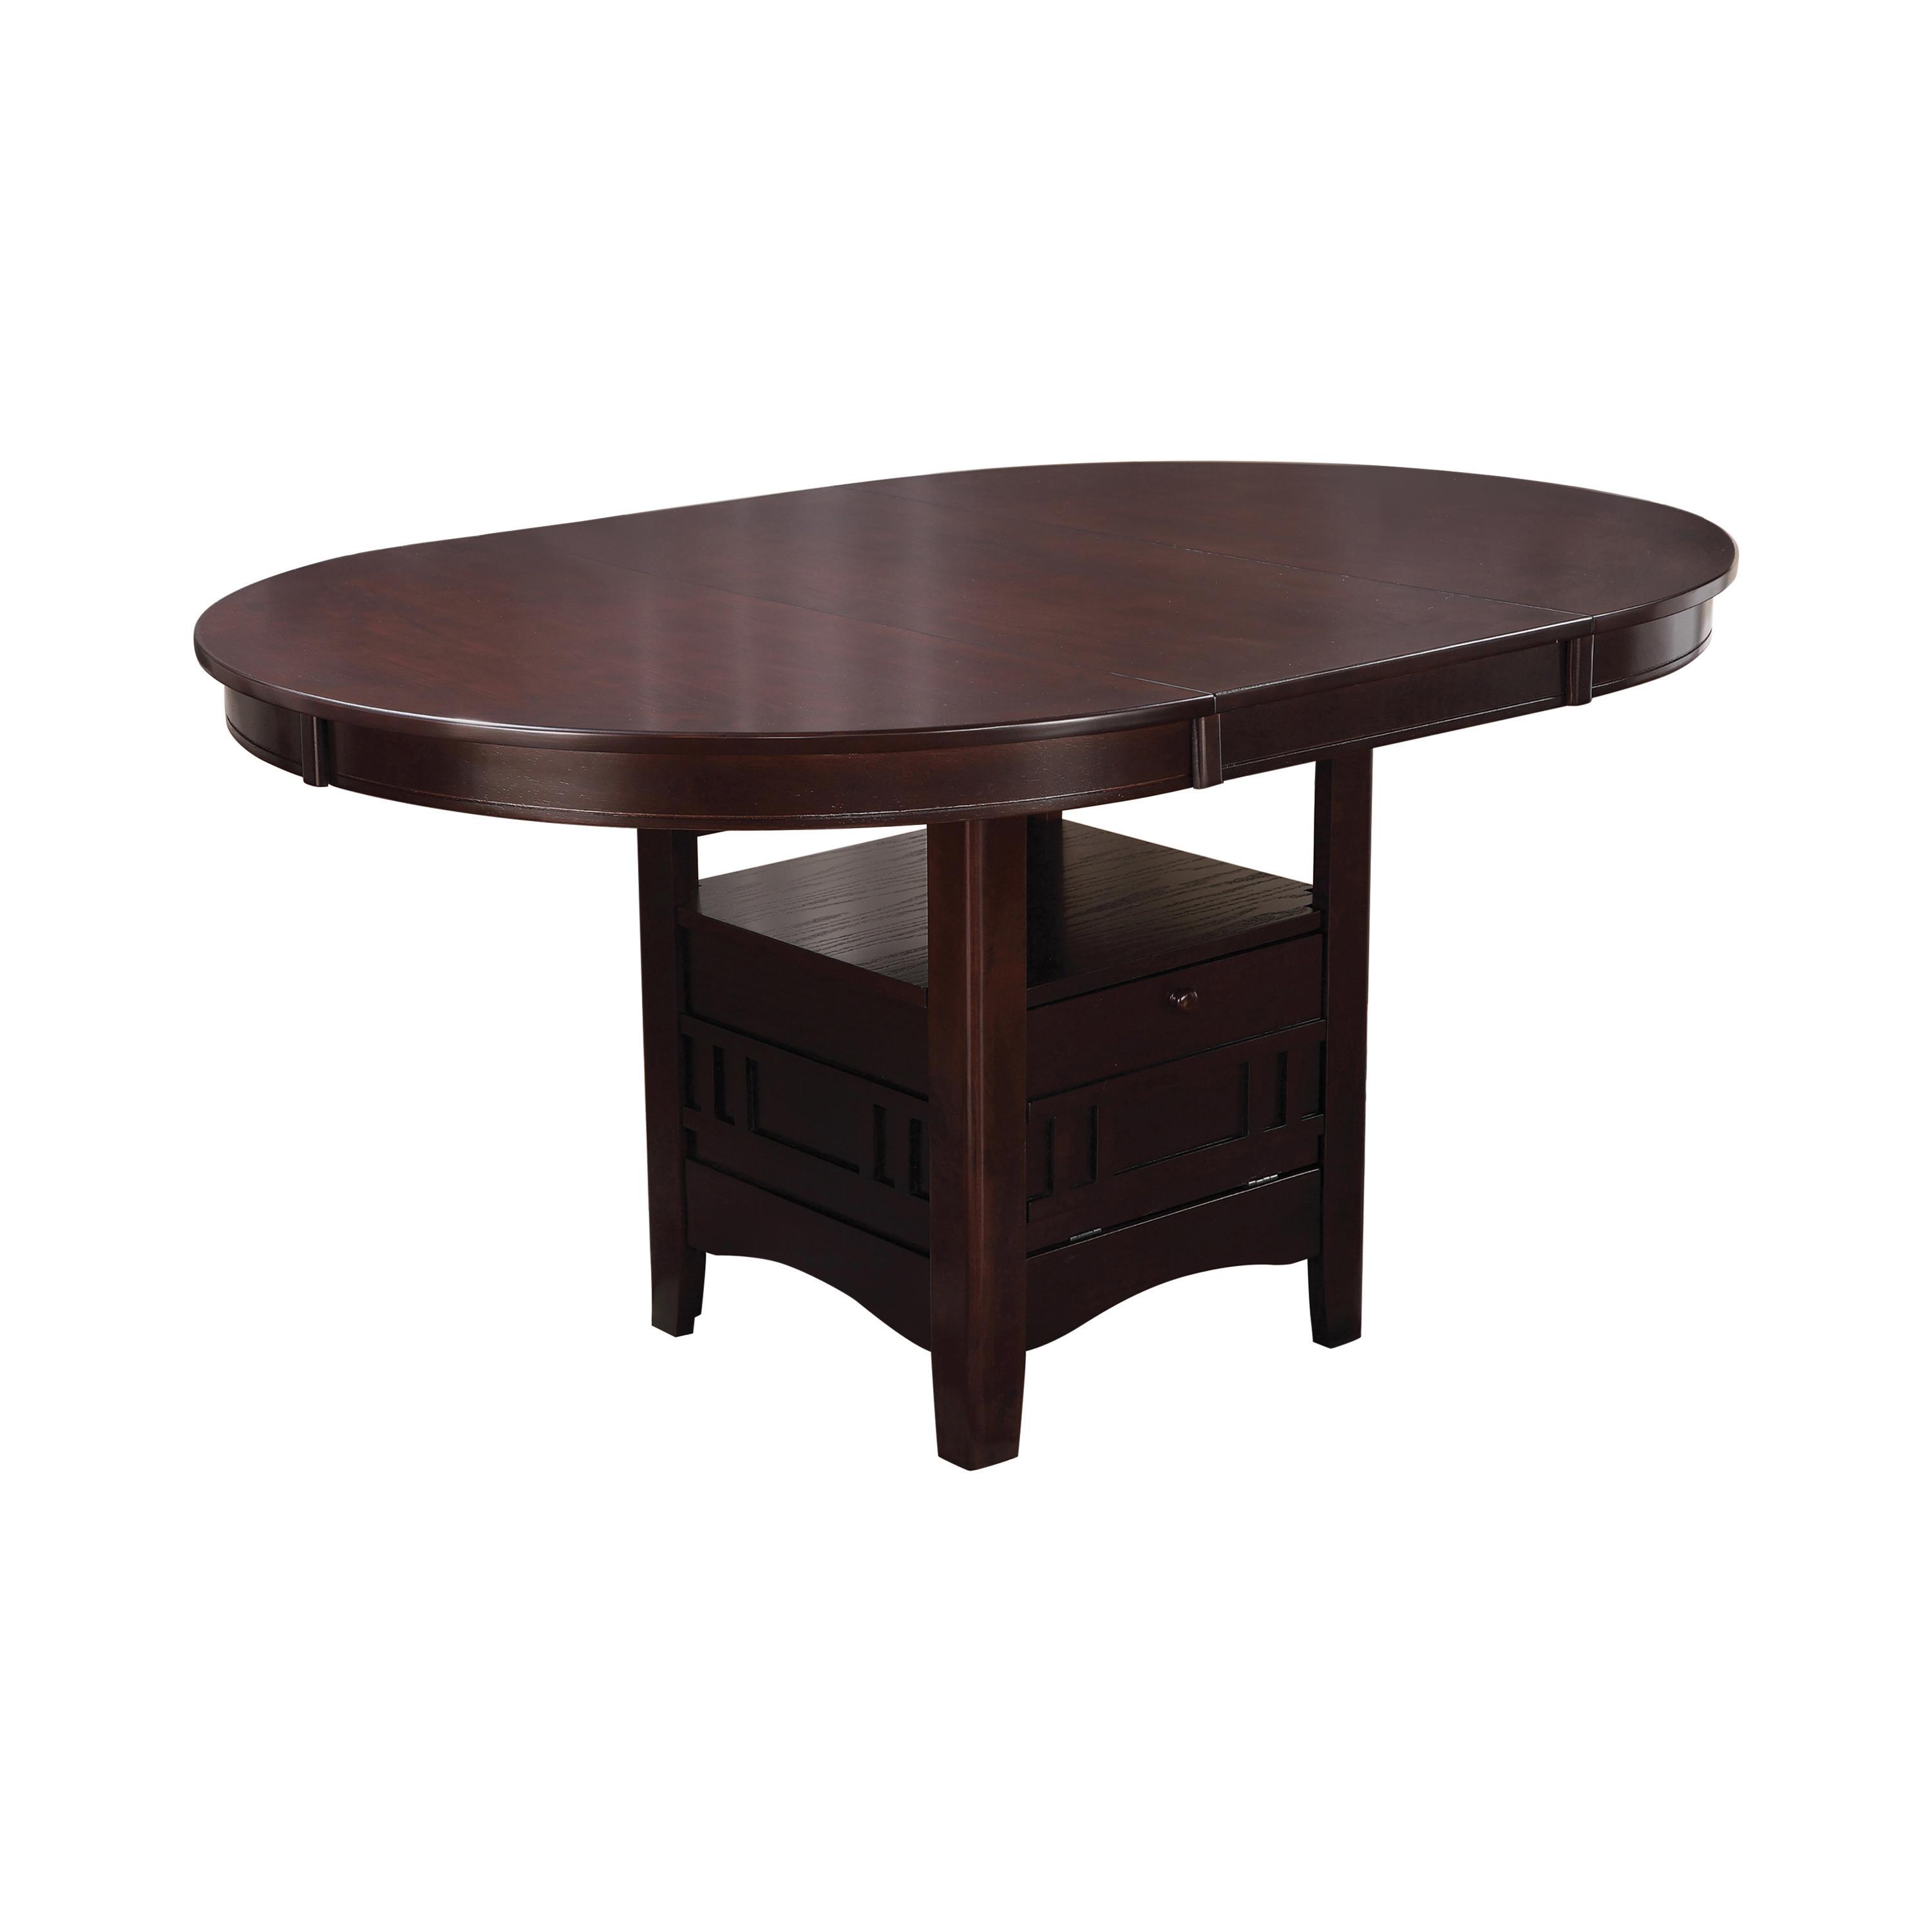 Transitional Dining Table 102671 Lavon 102671 in Espresso 